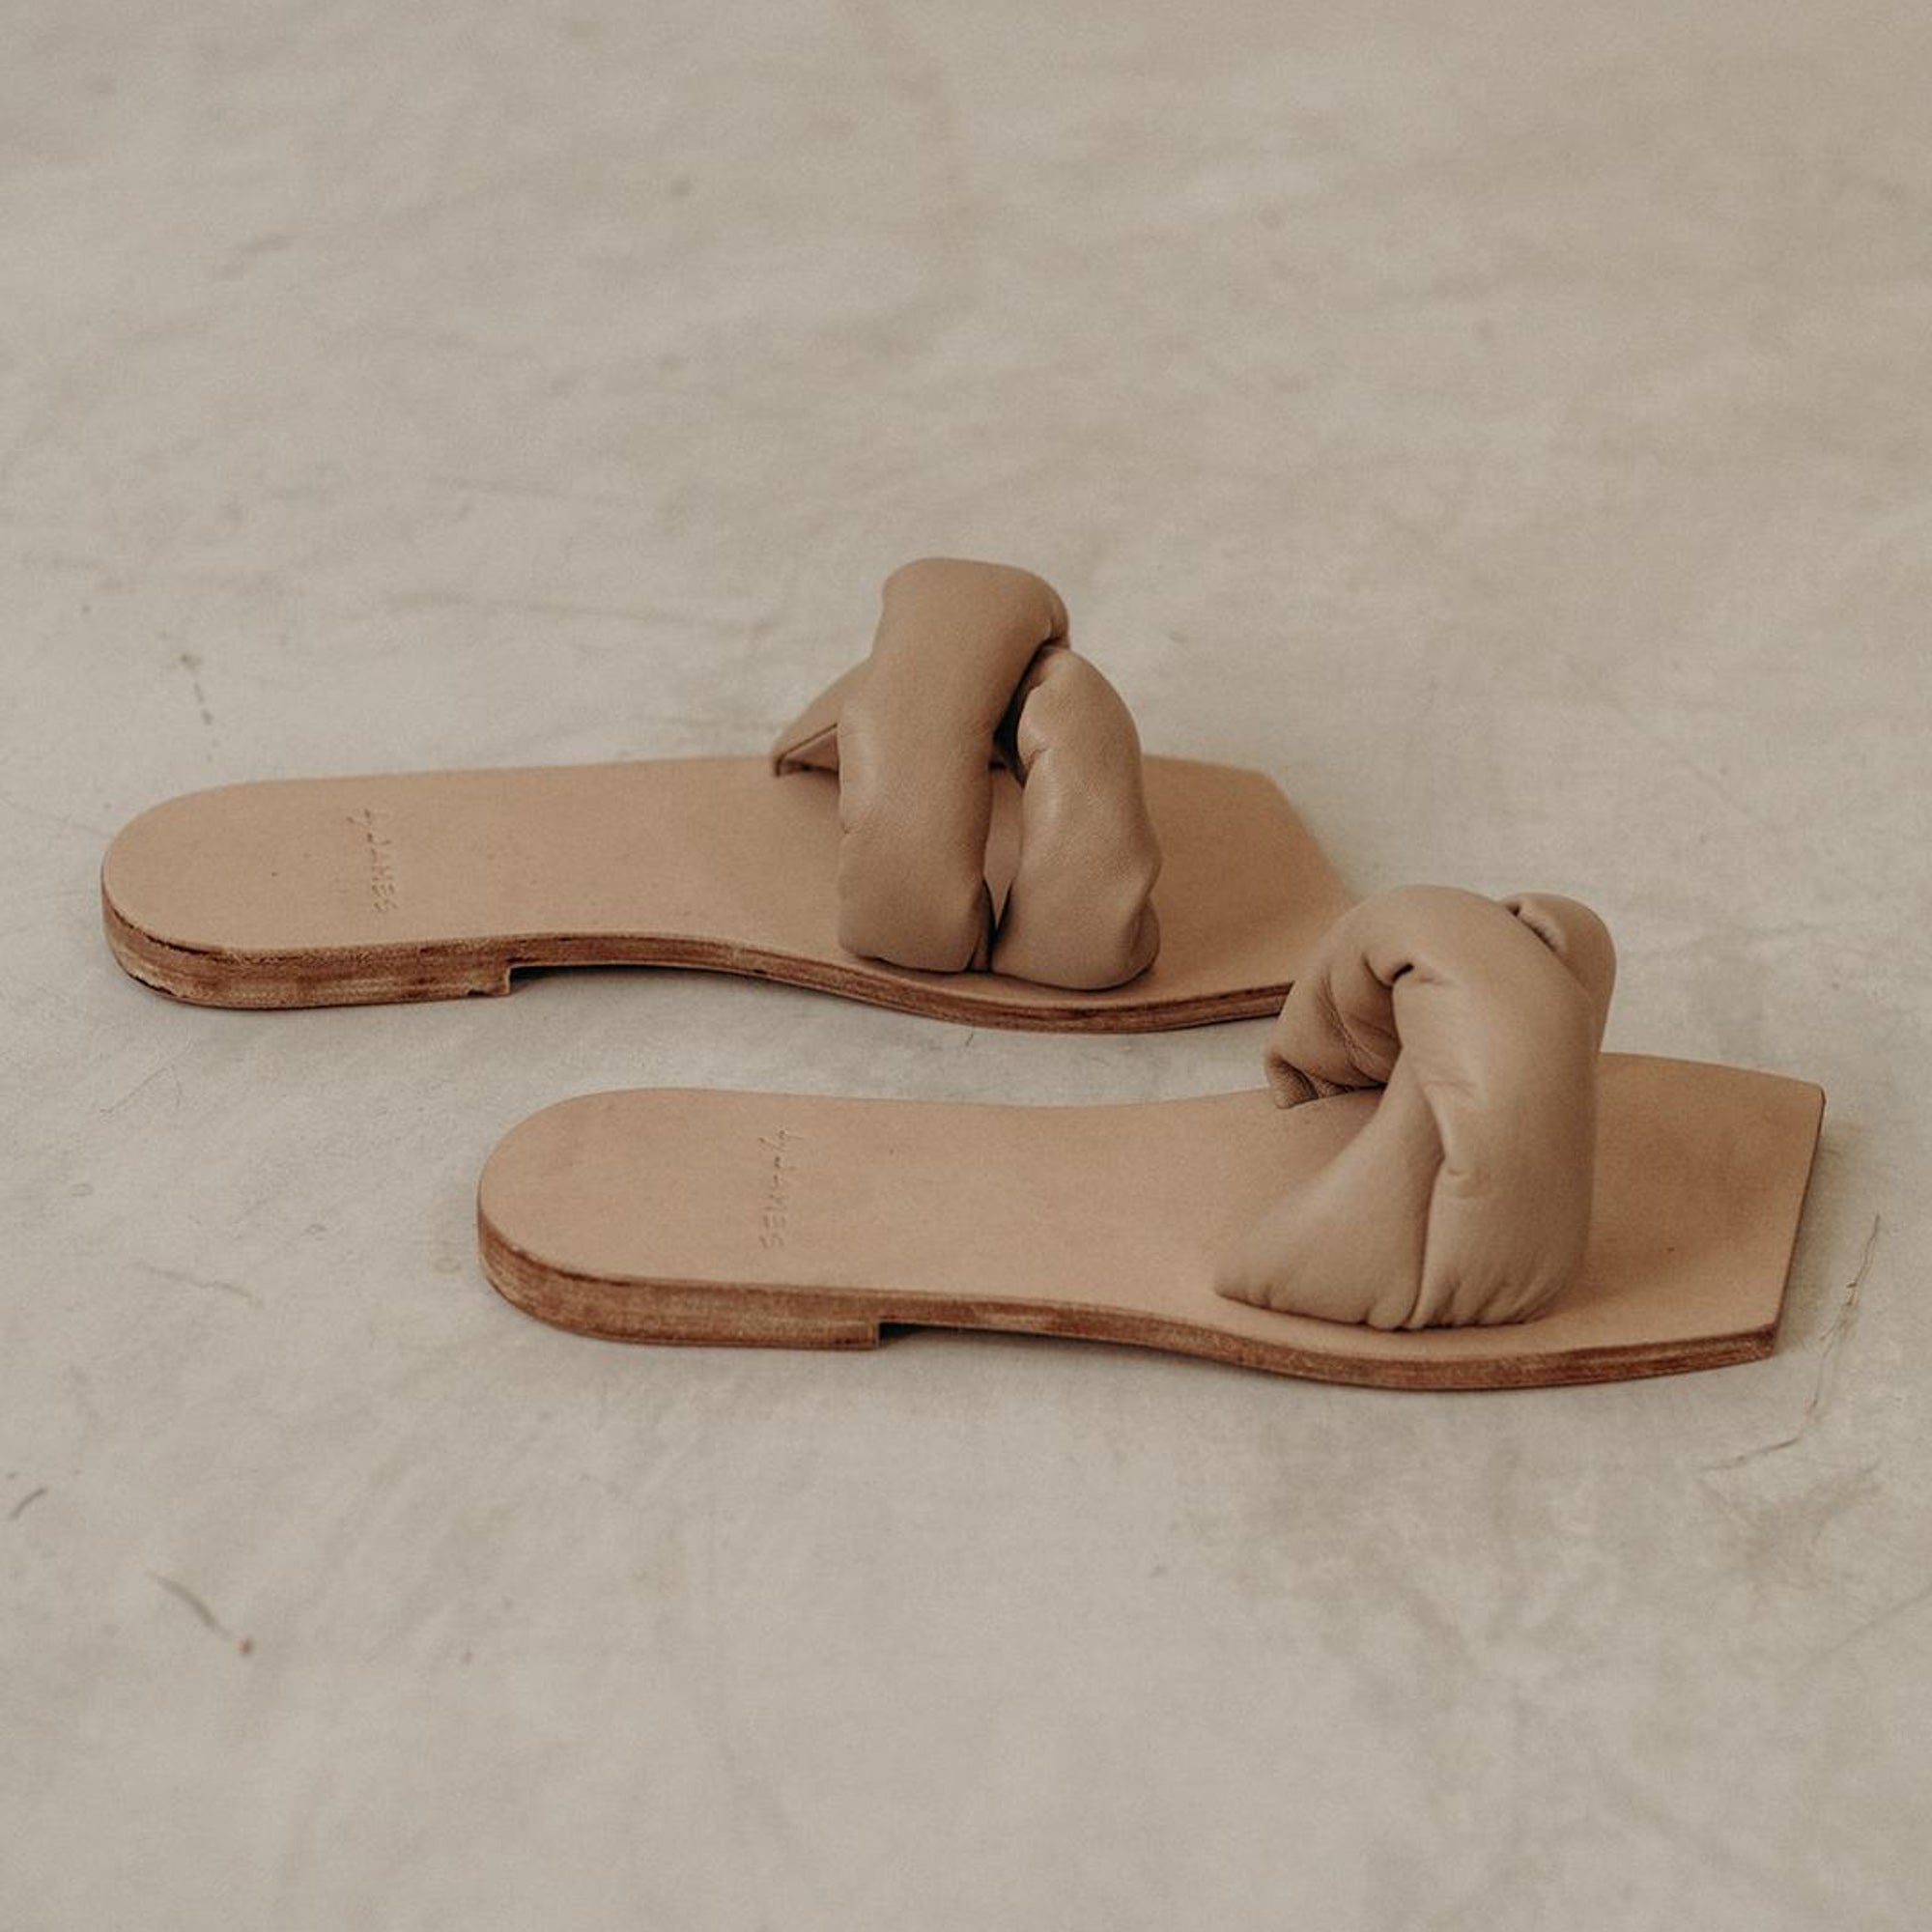 Padded leather sandals in nude made by James.